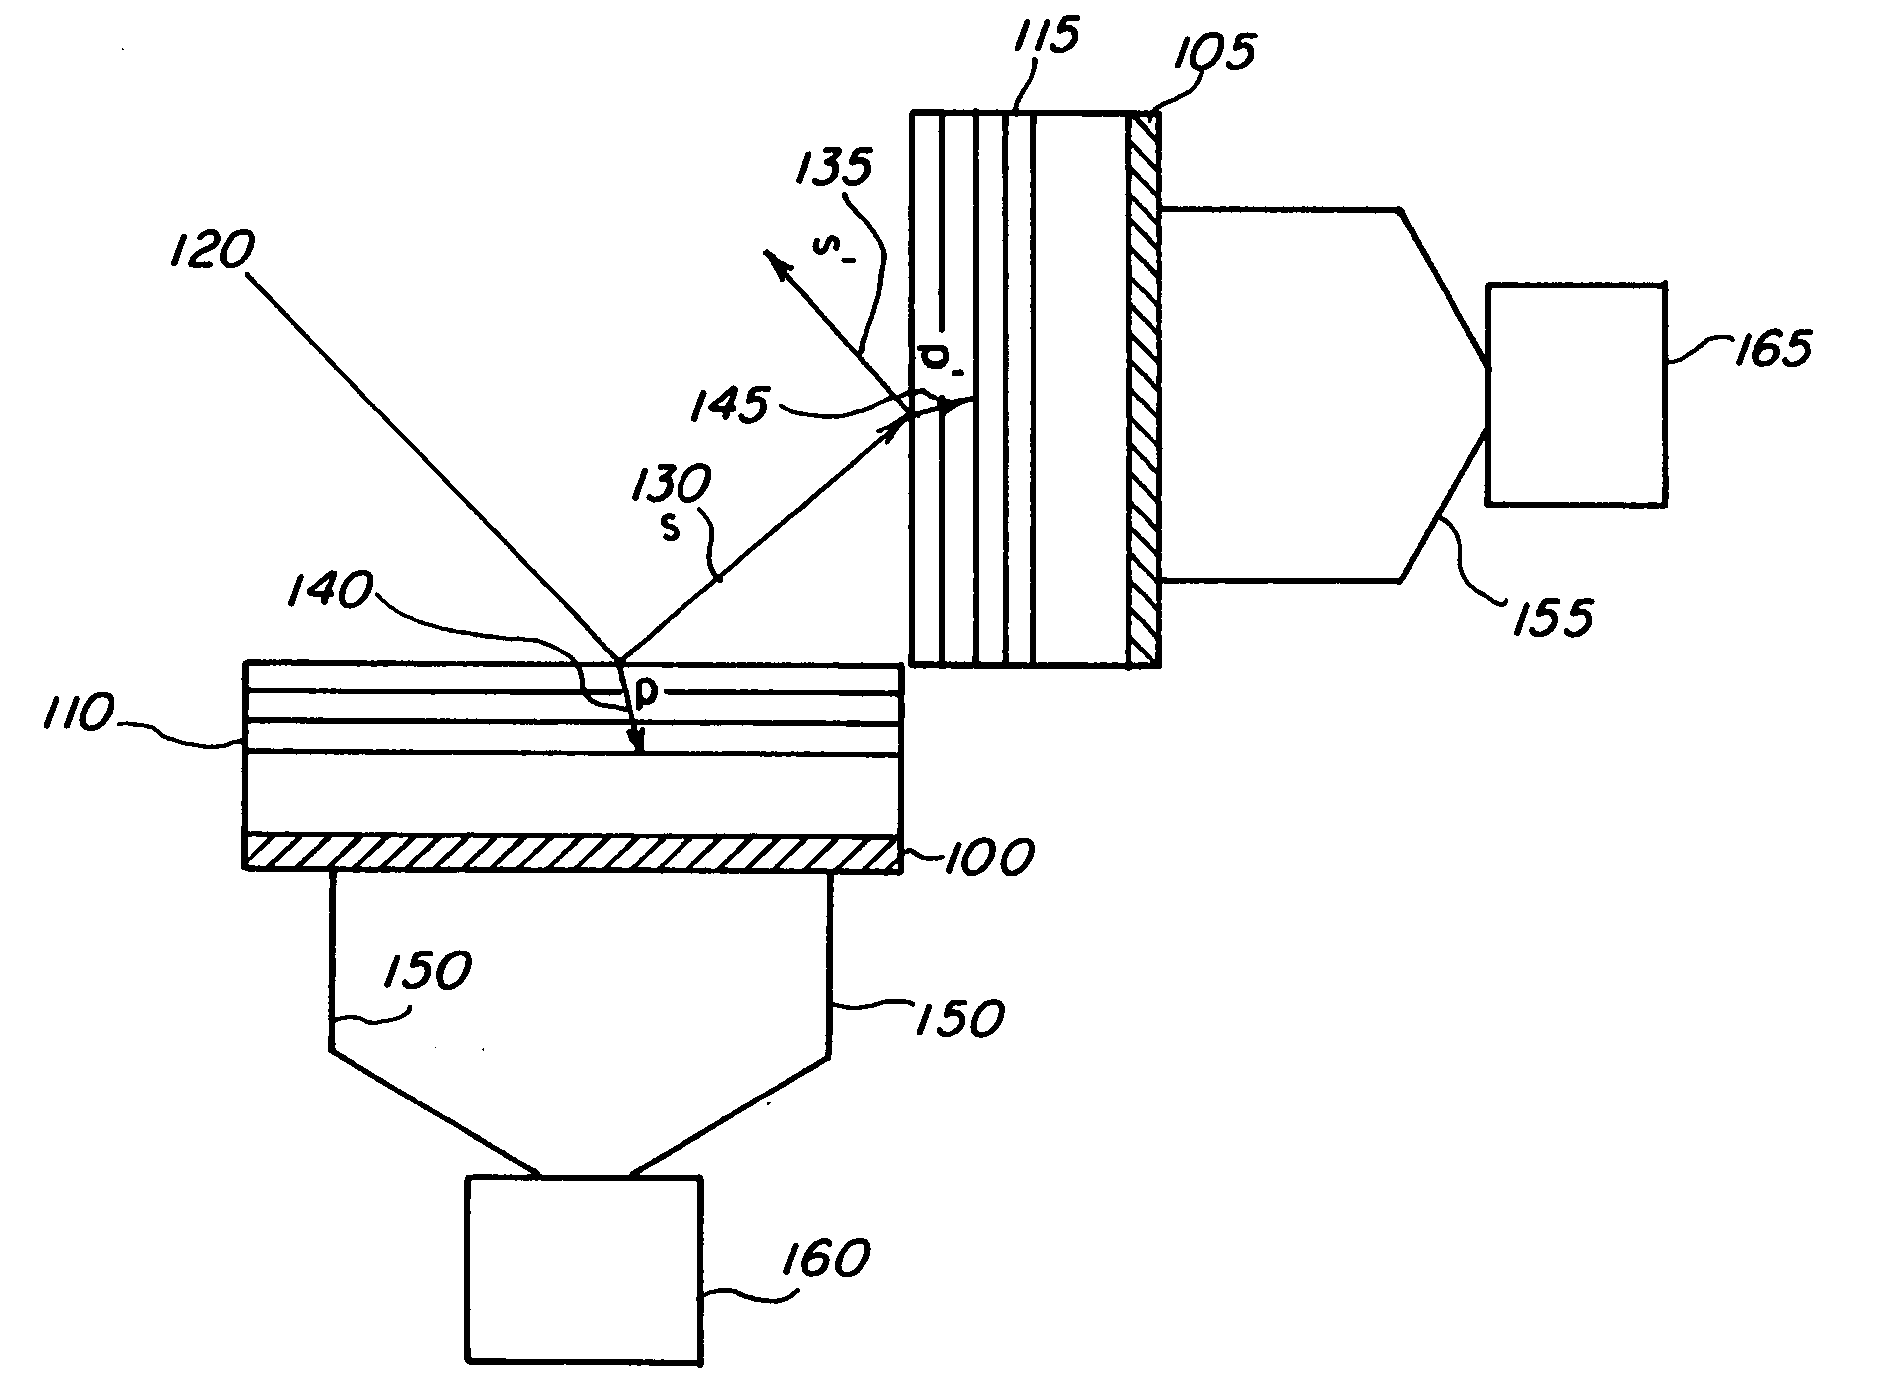 Multilayer polarization sensor (MPS) for x-ray and extreme ultraviolet radiation